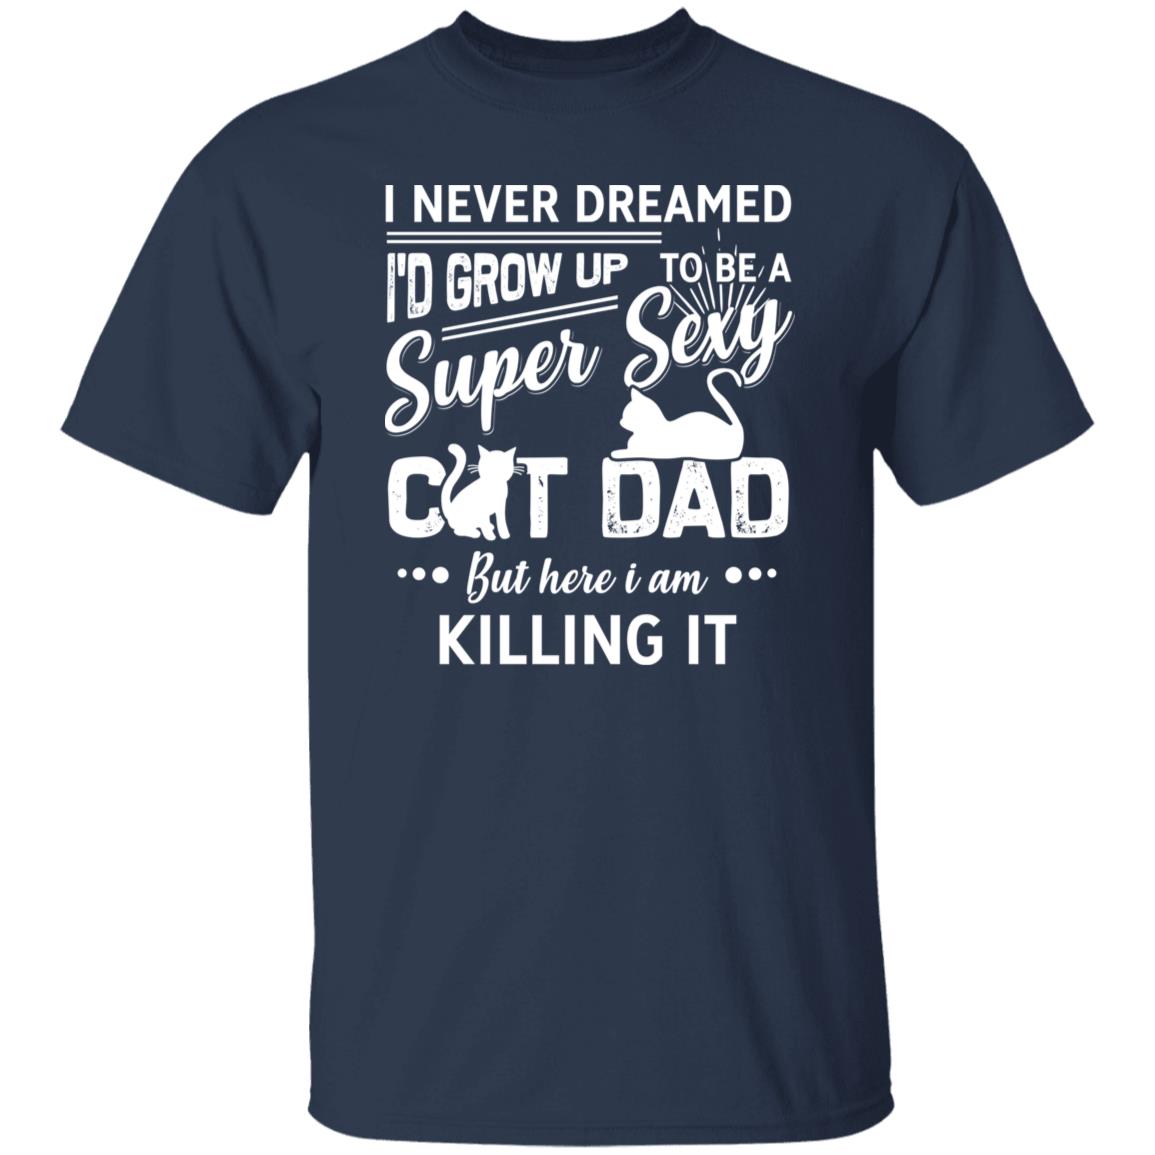 Super sexy cat dad T-Shirt gift Here I am killing it Cat dad Unisex Tee Black Navy Dark Heather-Navy-Family-Gift-Planet